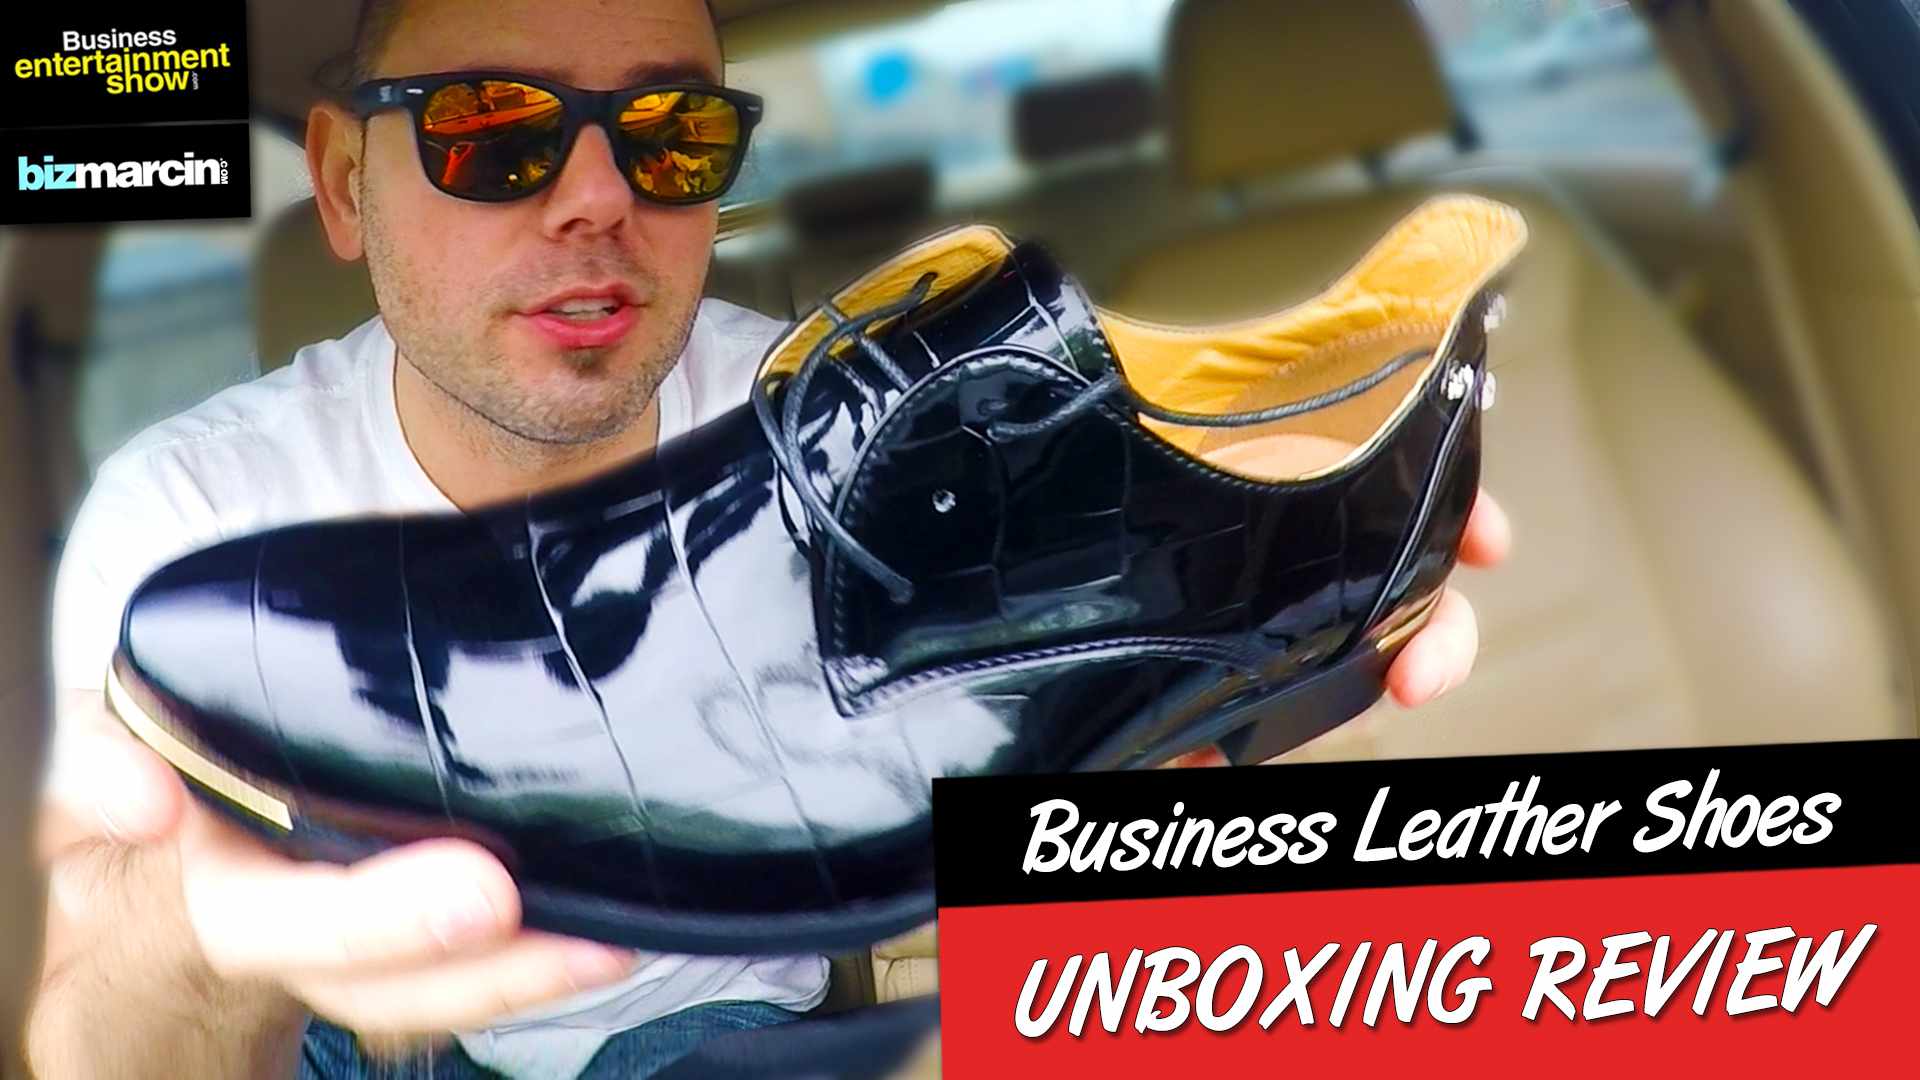 AWESOME $15 LEATHER Business Shoes from WISH.com UNBOXING Review